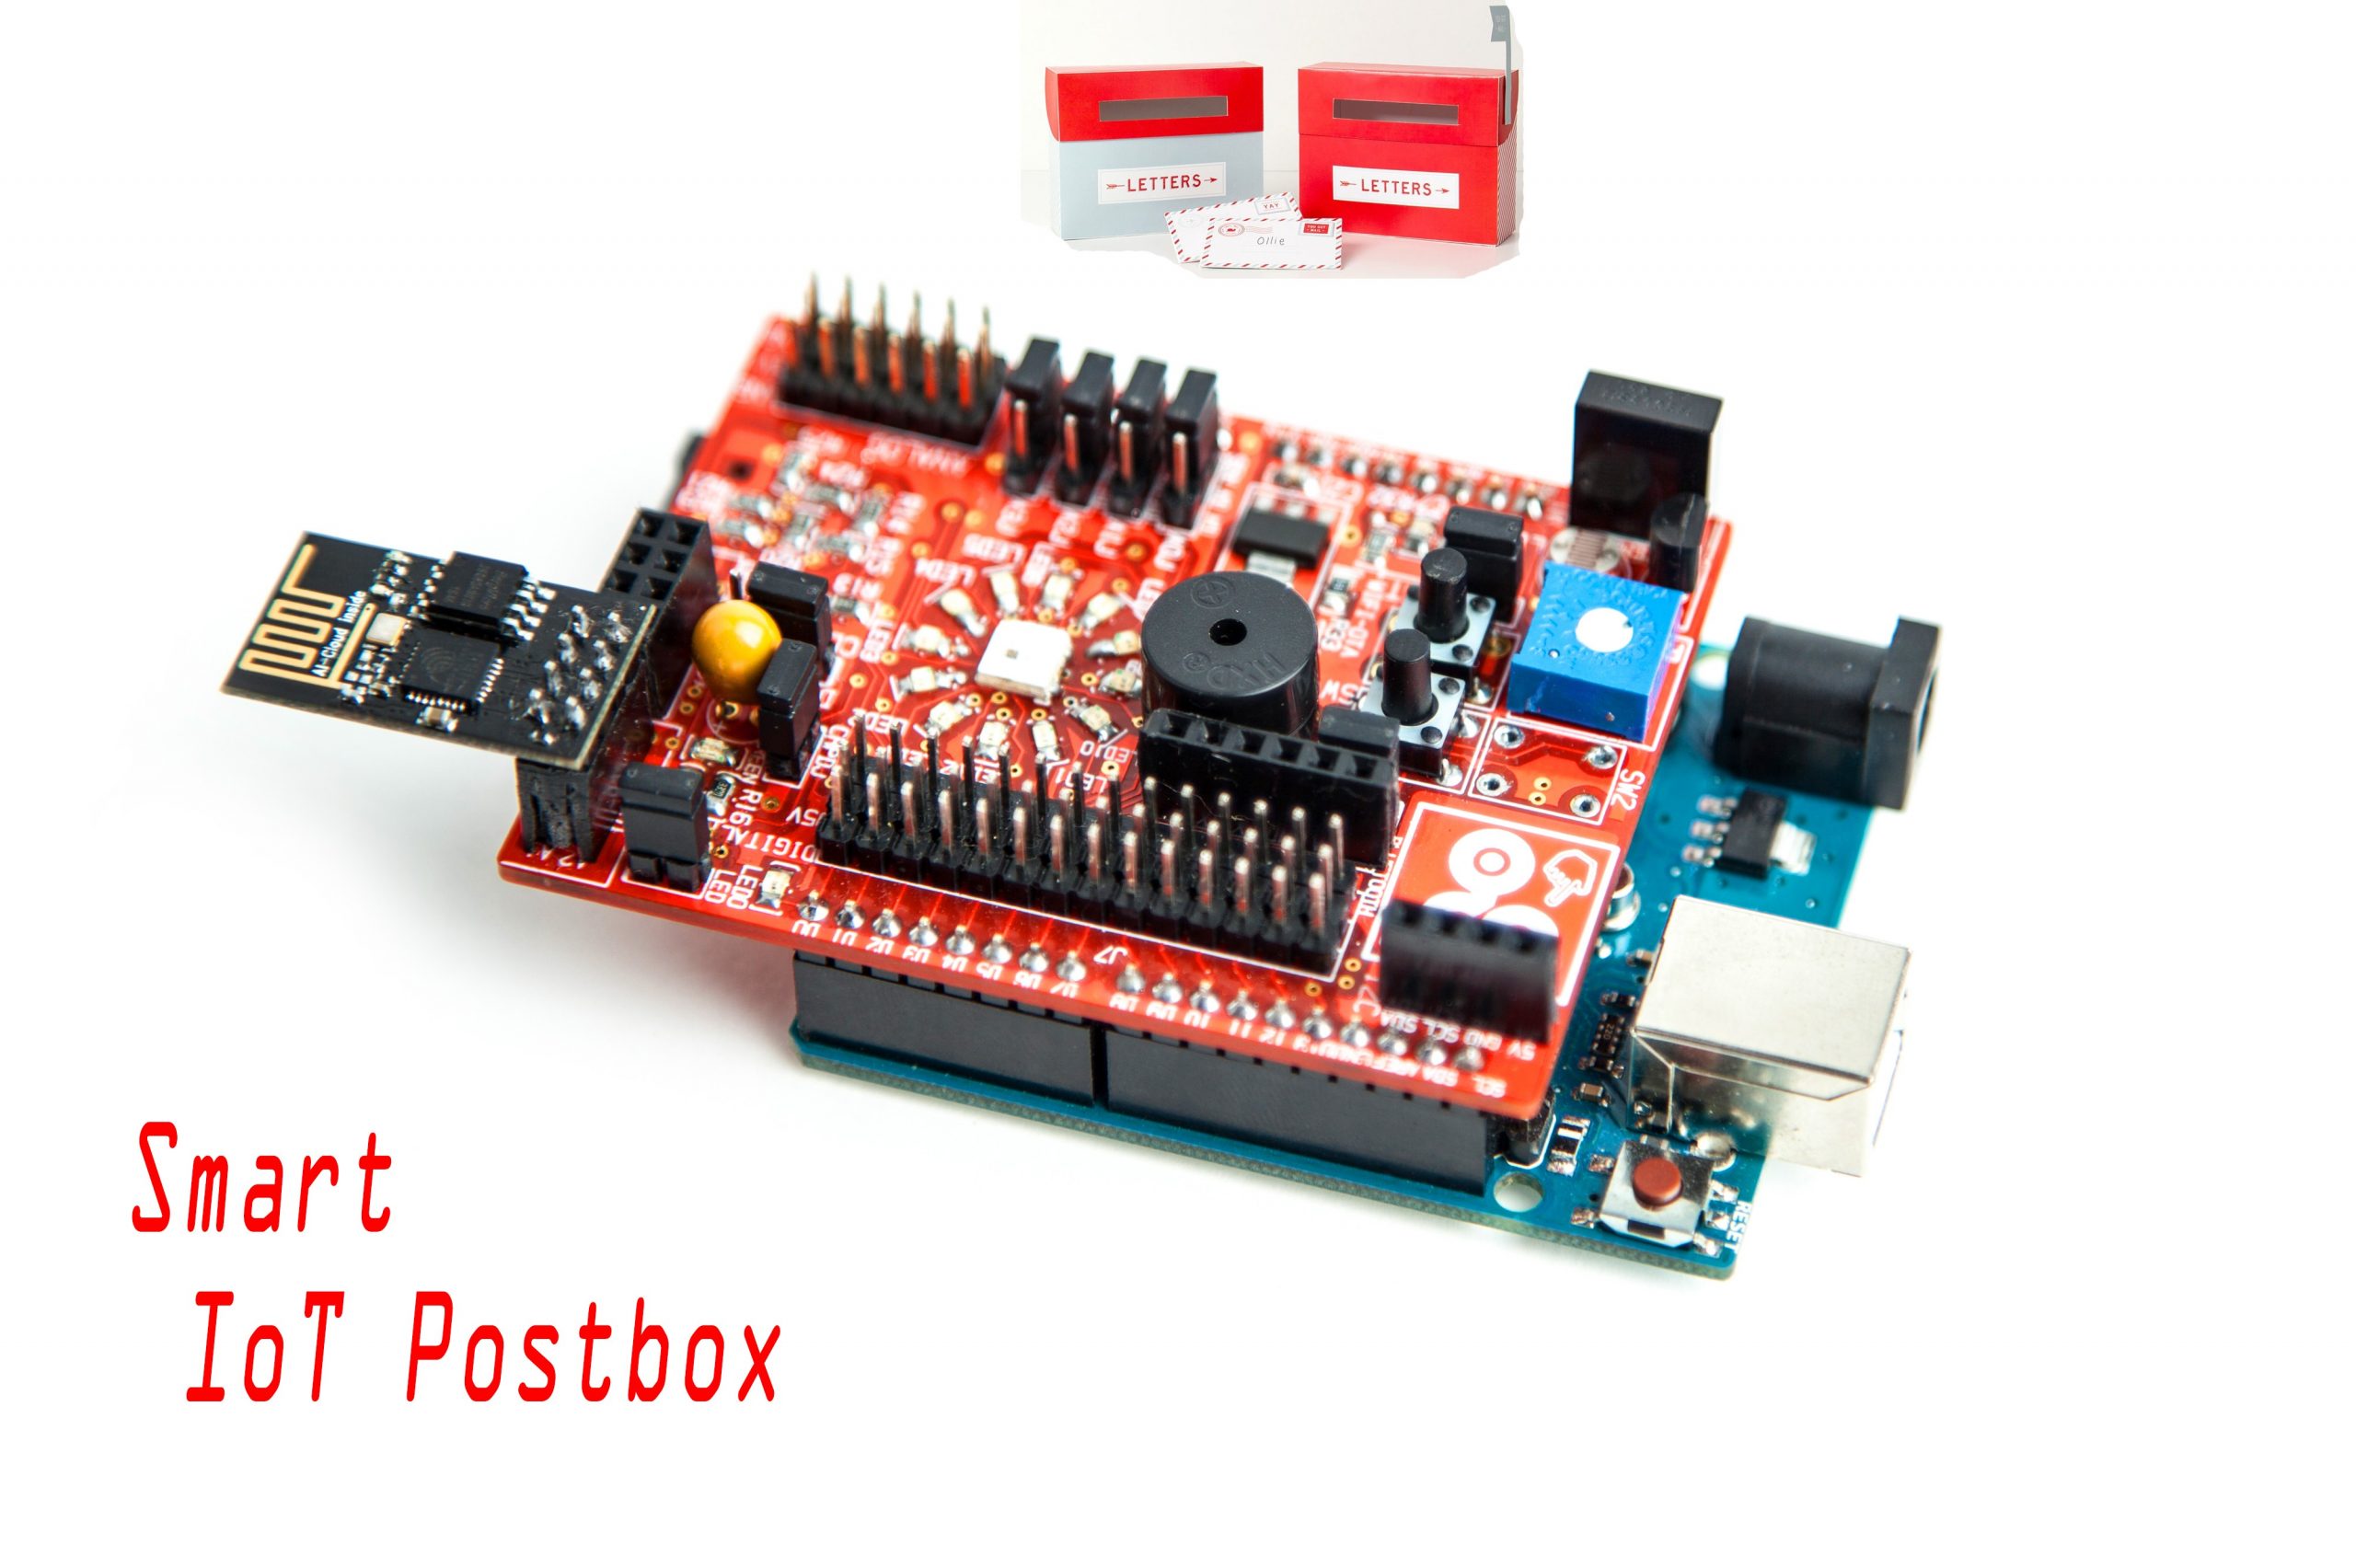 Smart IoT Postbox with Arduino, ESP-01, and idIoTware Shield